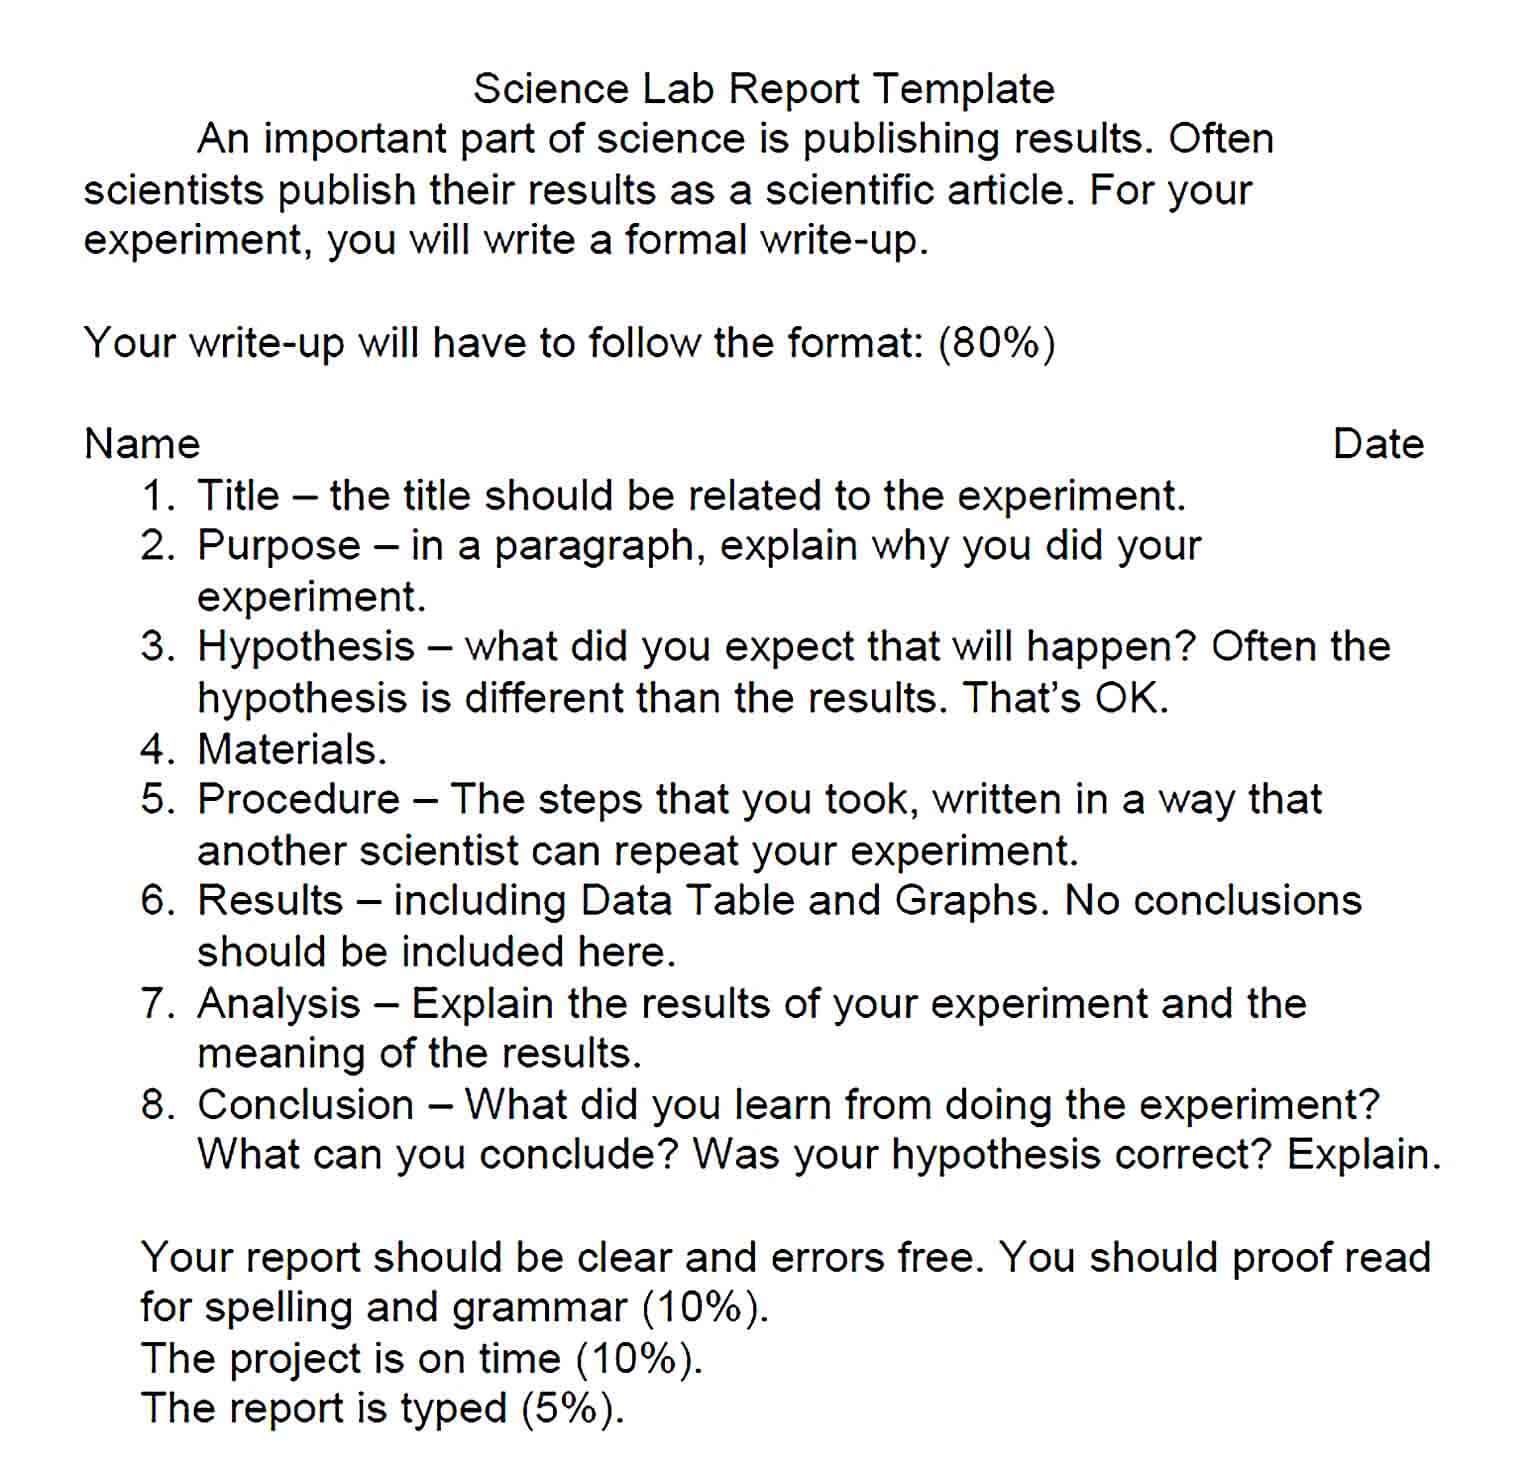 Sample Formal Science Lab Report Template 1